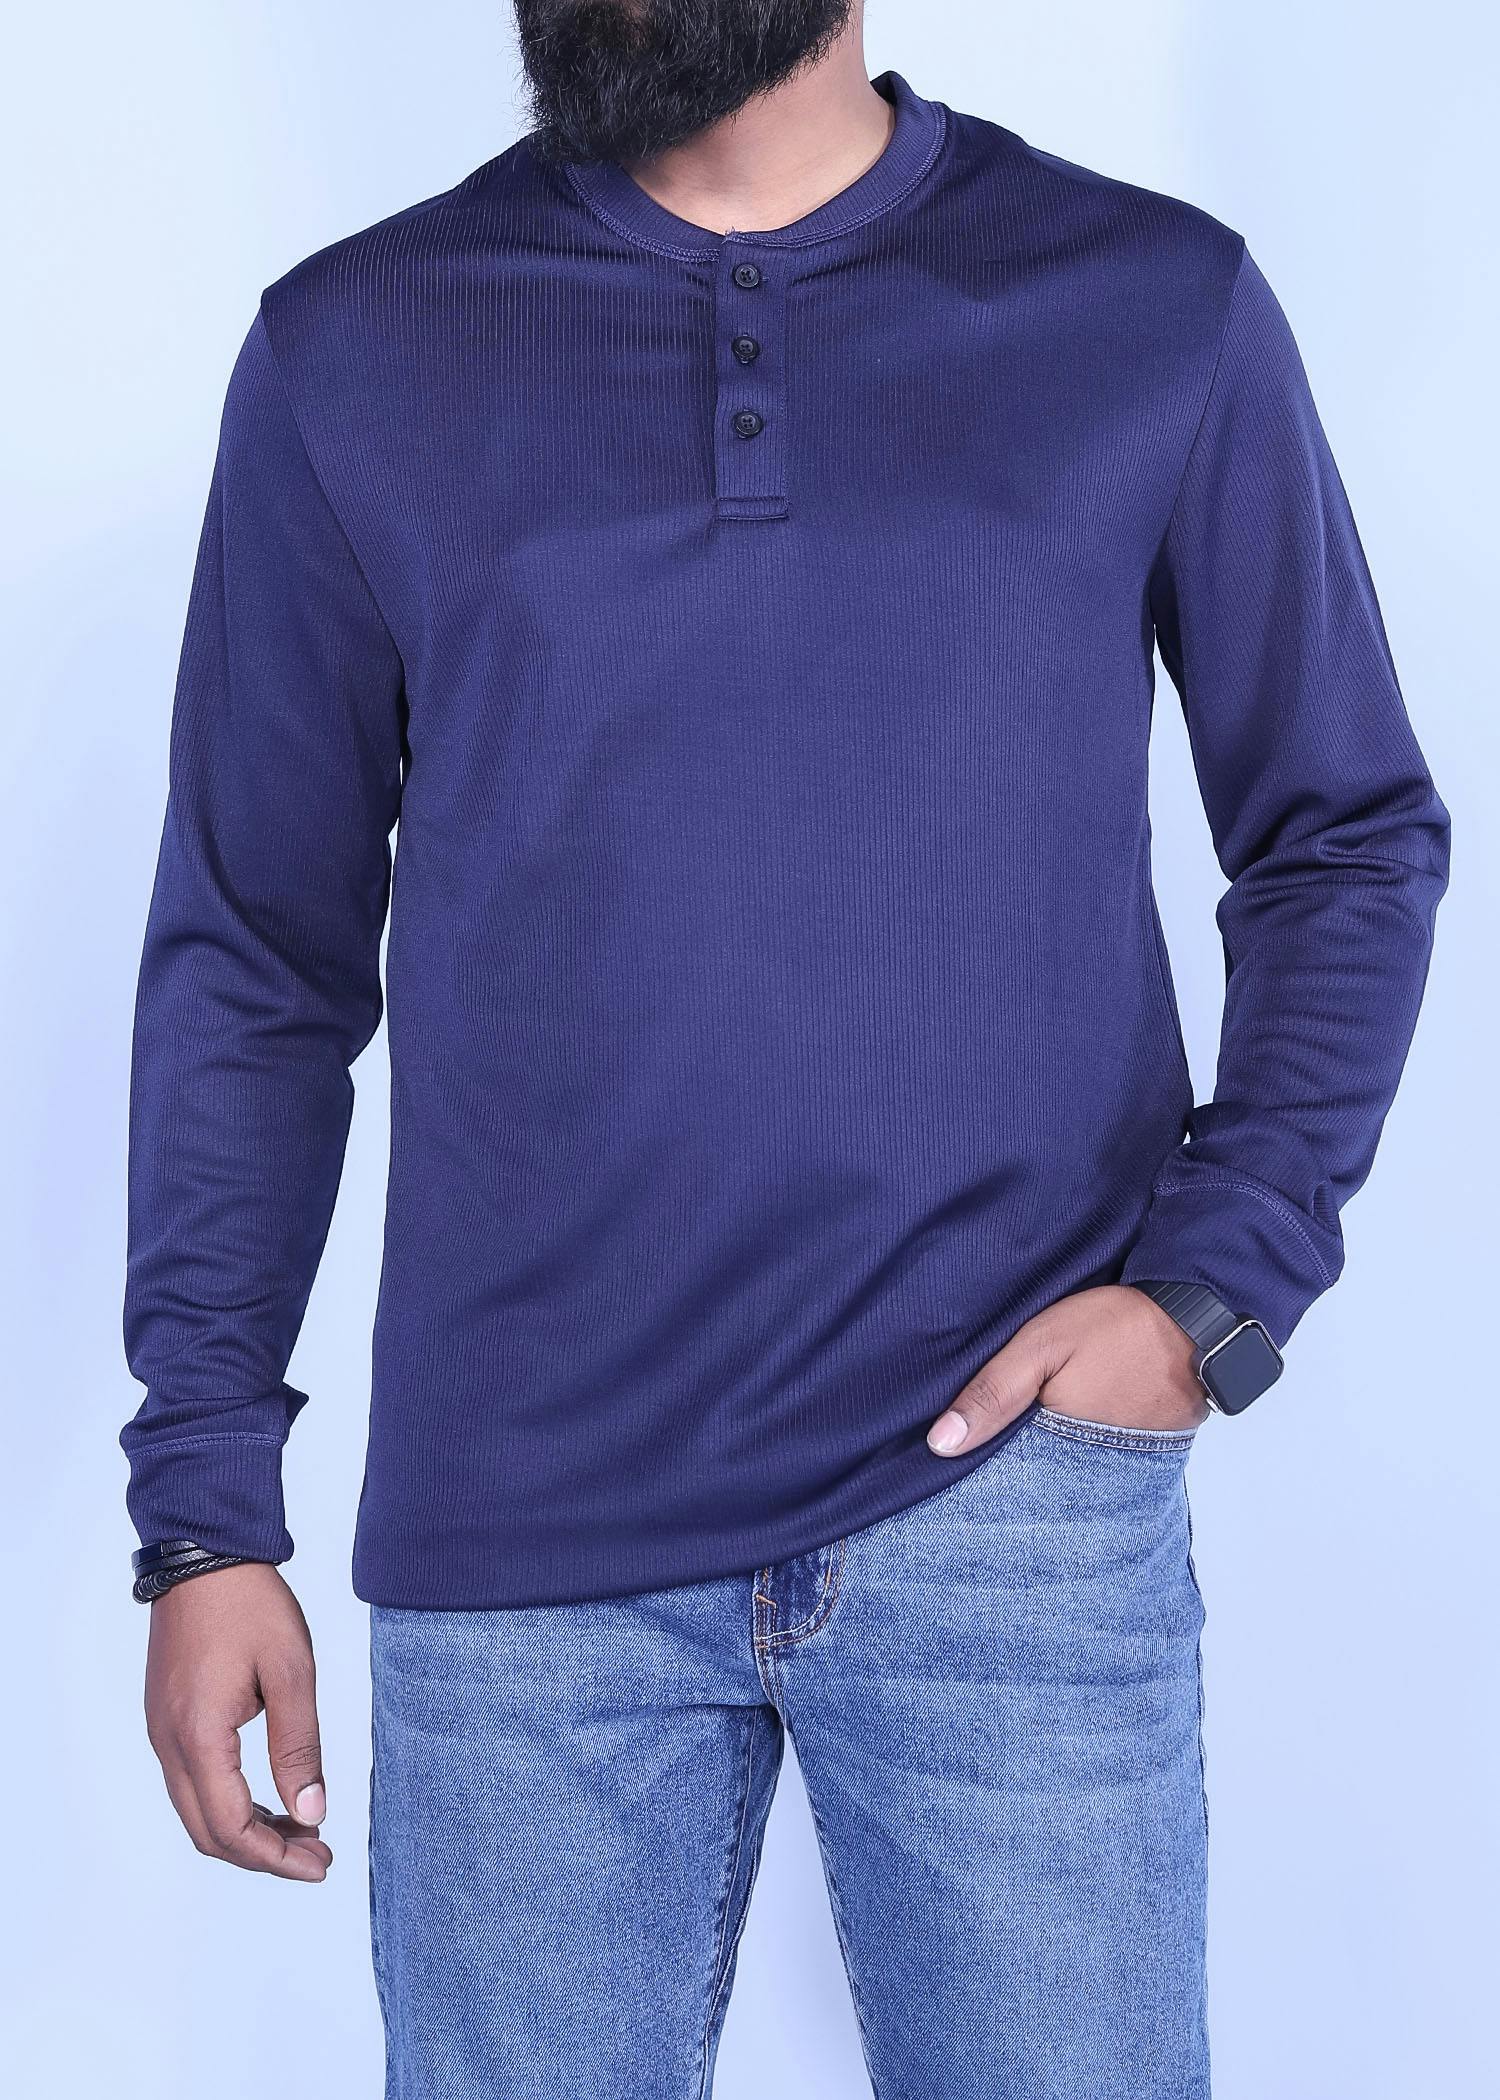 iwi henley ls t shirt navy color half front view